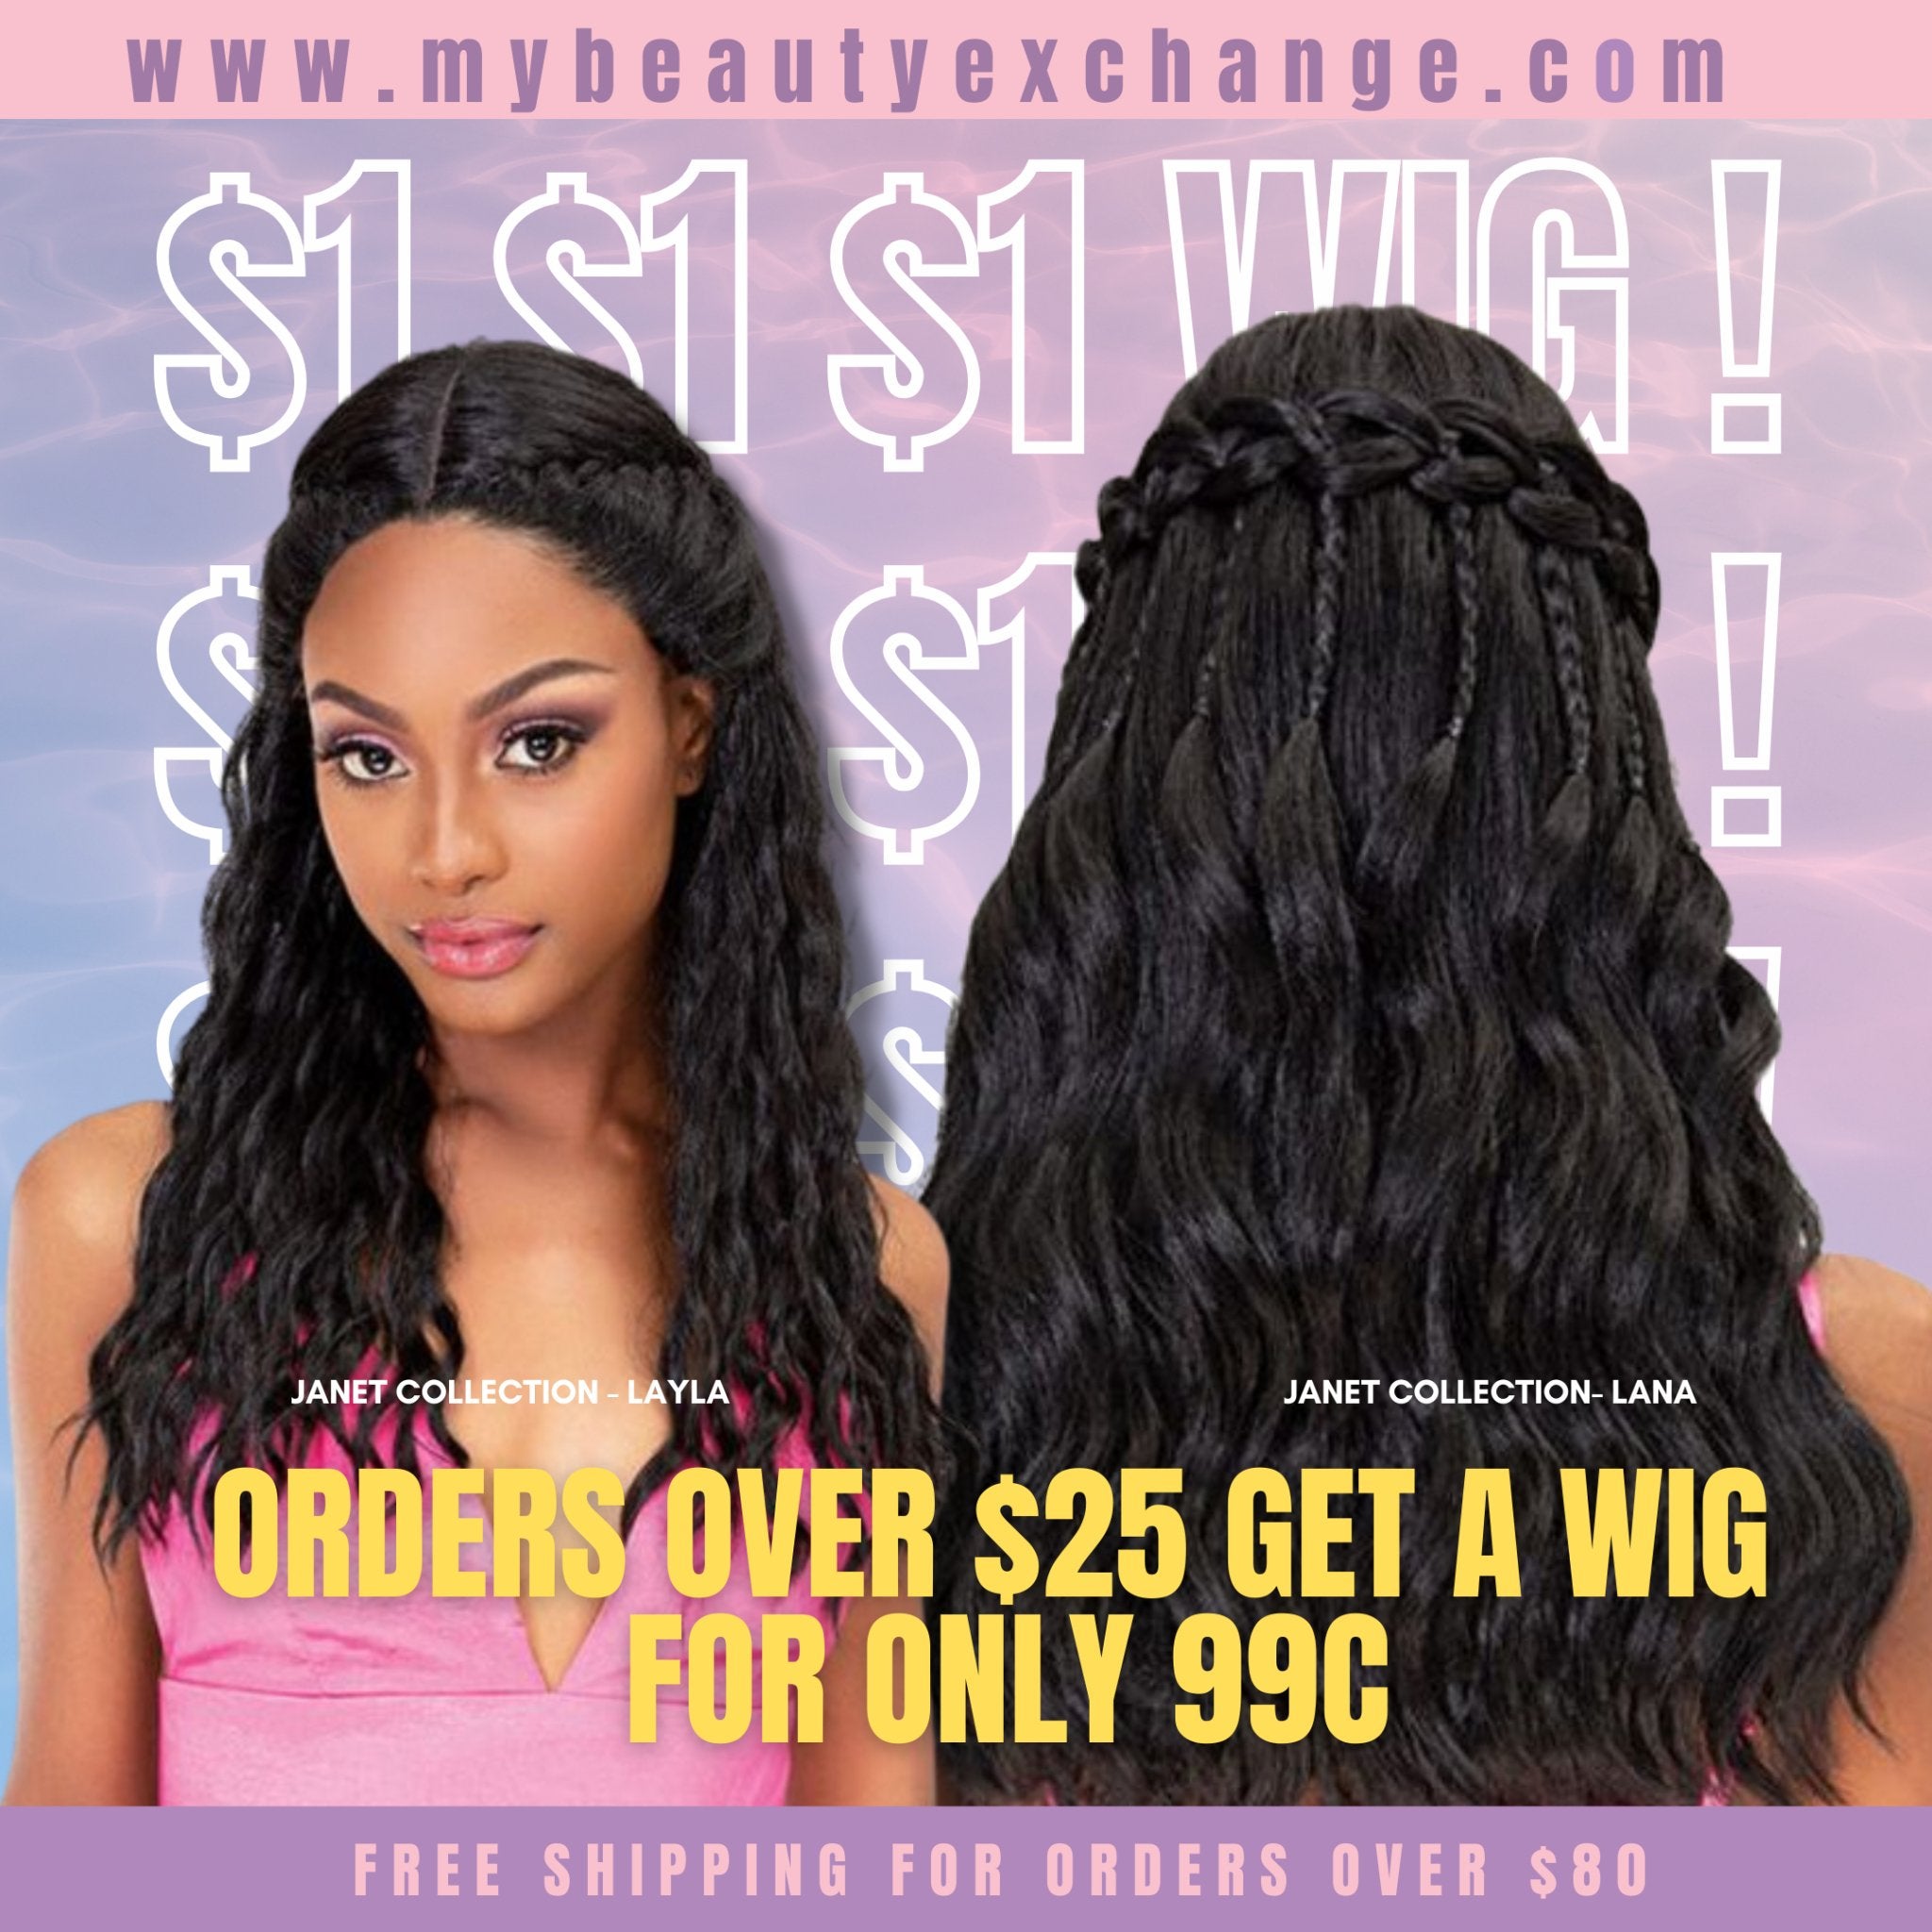 Orders Over $25, Get this wig for $1 - Beauty Exchange Beauty Supply